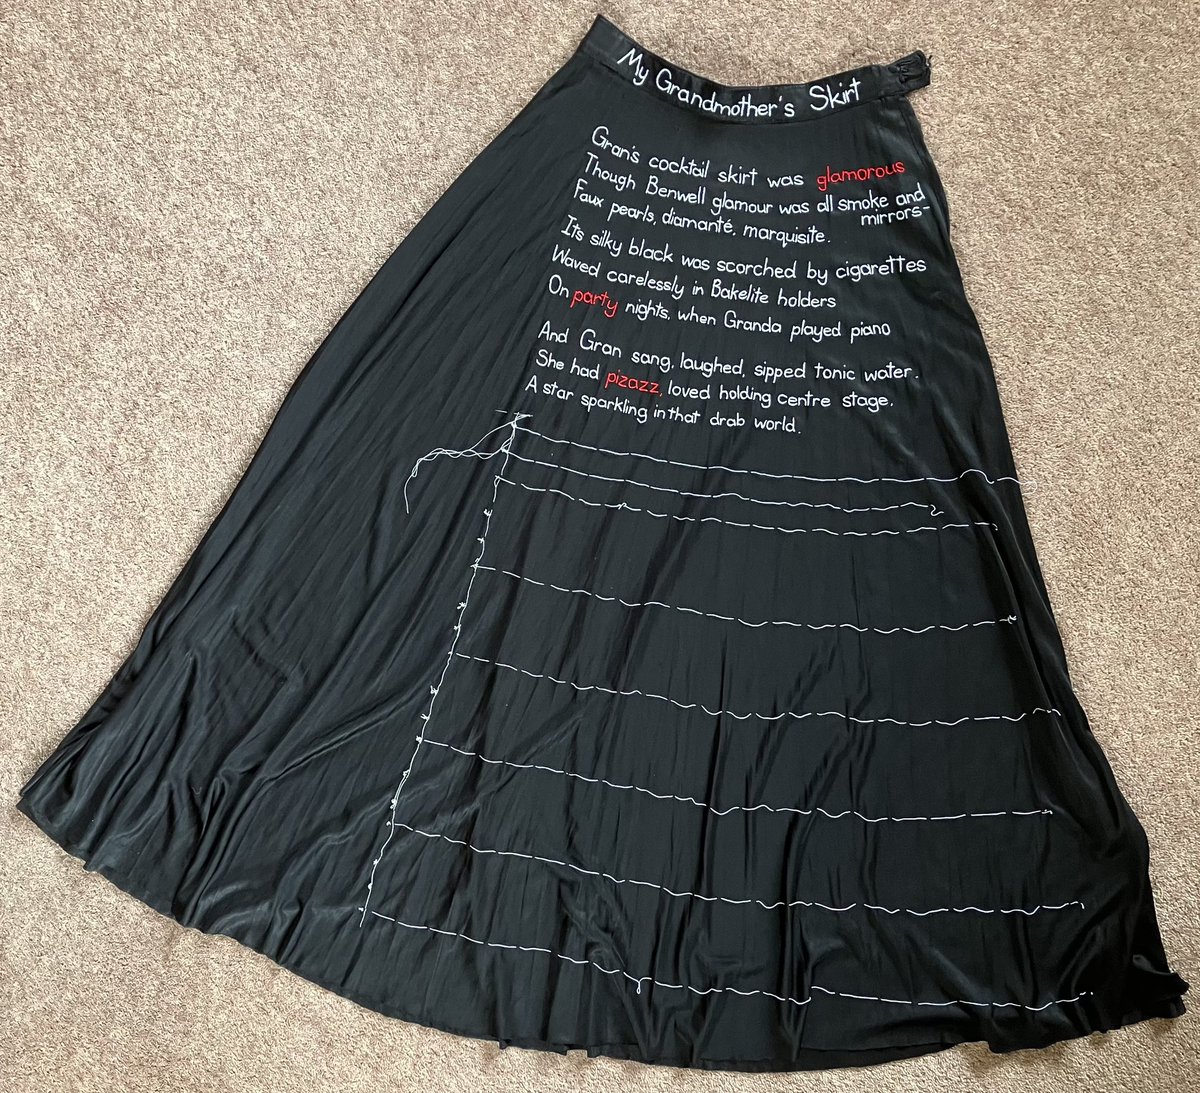 With the third stanza stitched, I’m now a third of the way to embroidering my poem on my Gran’s old skirt. 52/100 #100daysofstitchinggransskirt #the100dayproject